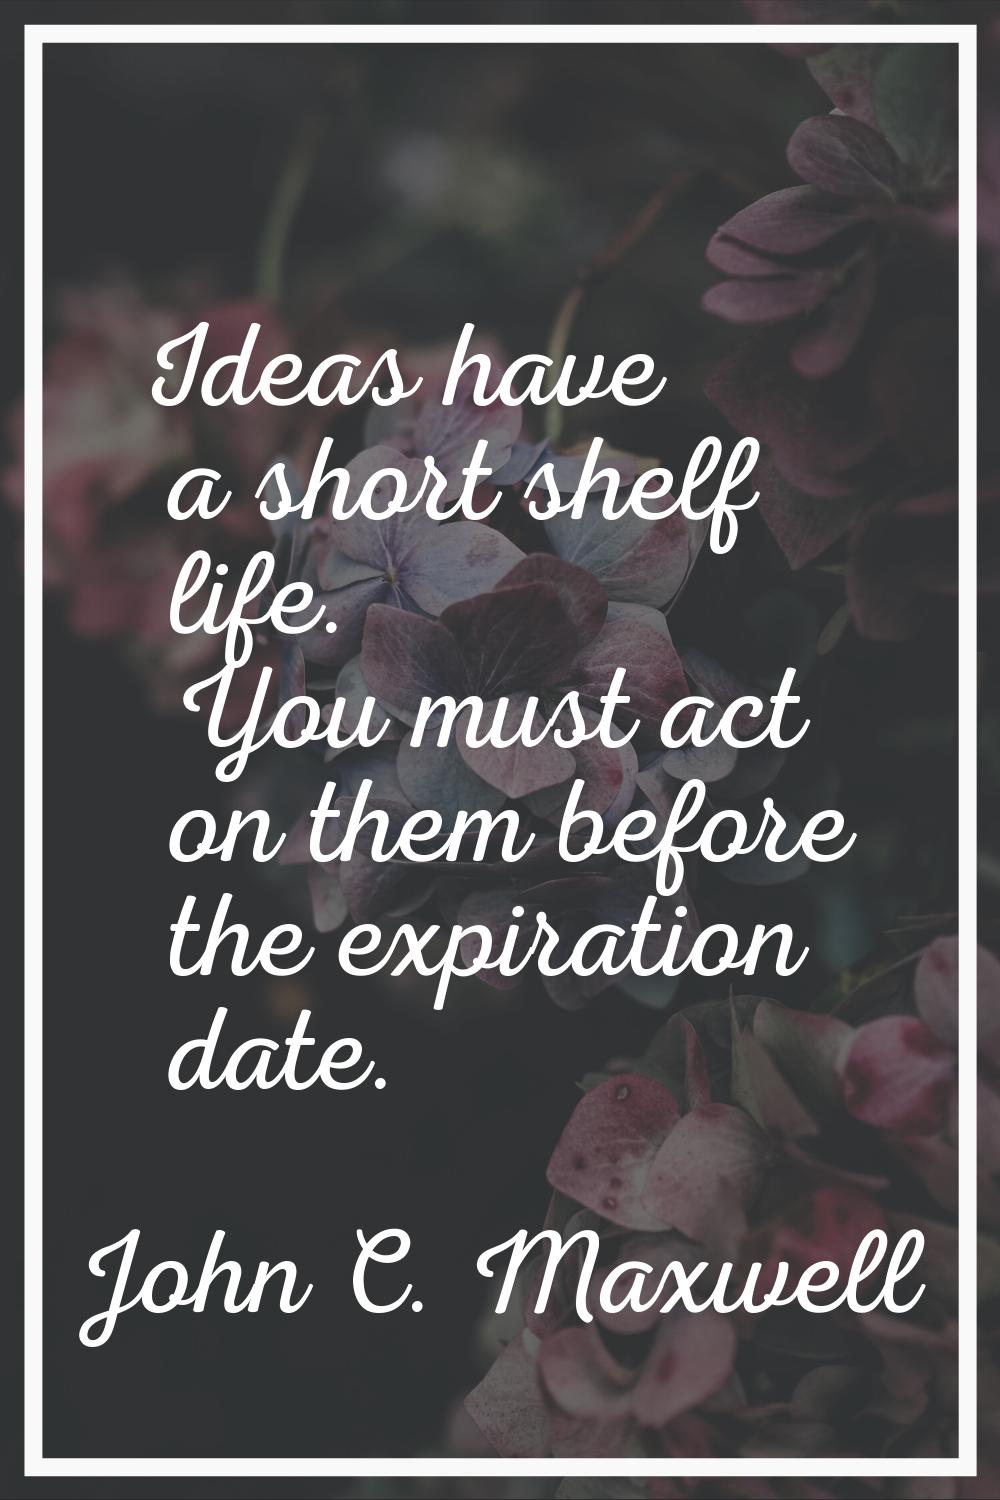 Ideas have a short shelf life. You must act on them before the expiration date.